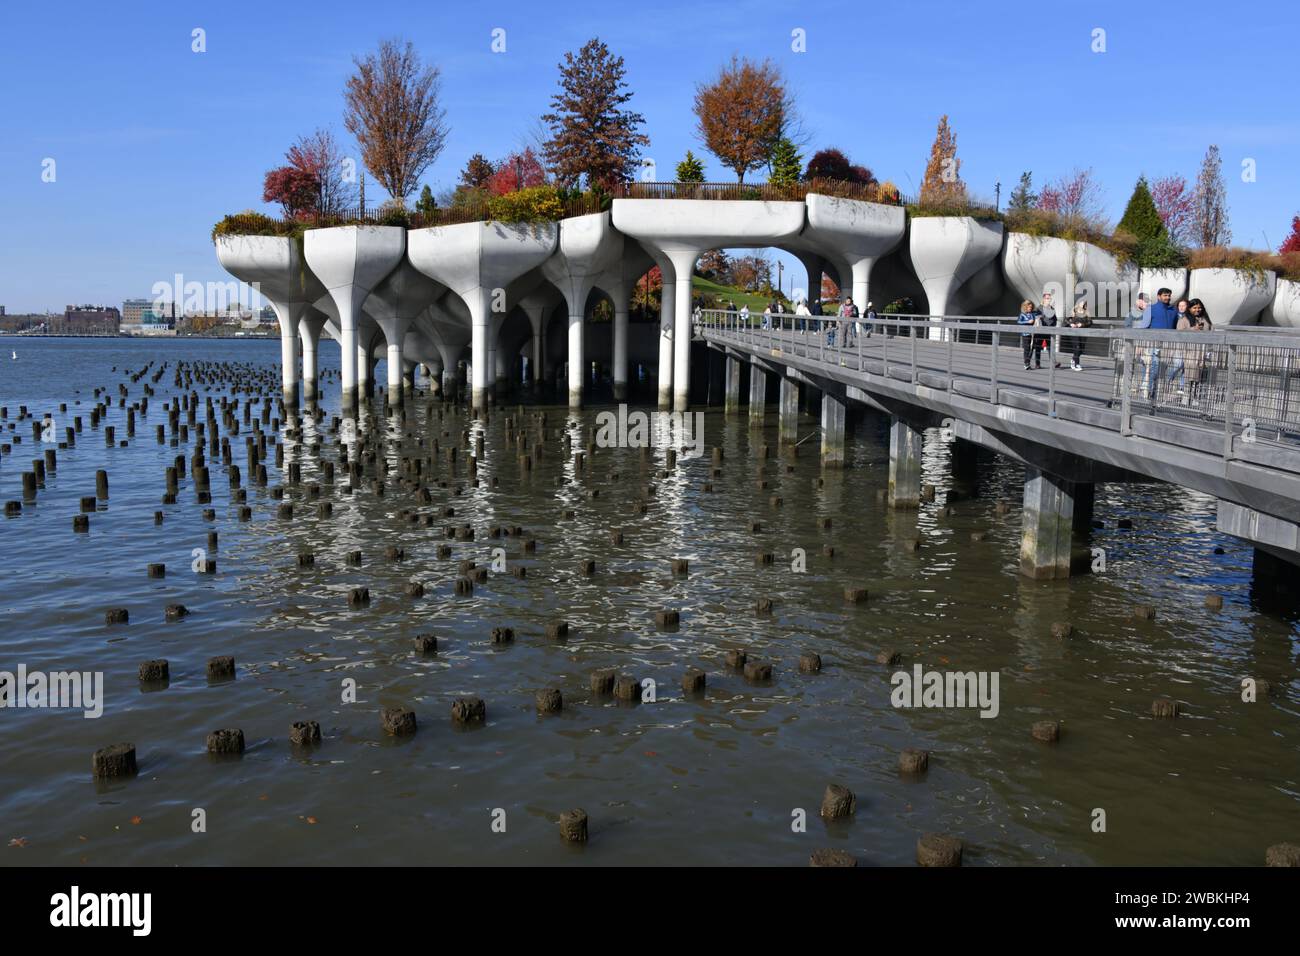 Built on the remnants of the old Pier 54, Little Island Park on the Hudson River in Manhattan, New York City USA Stock Photo